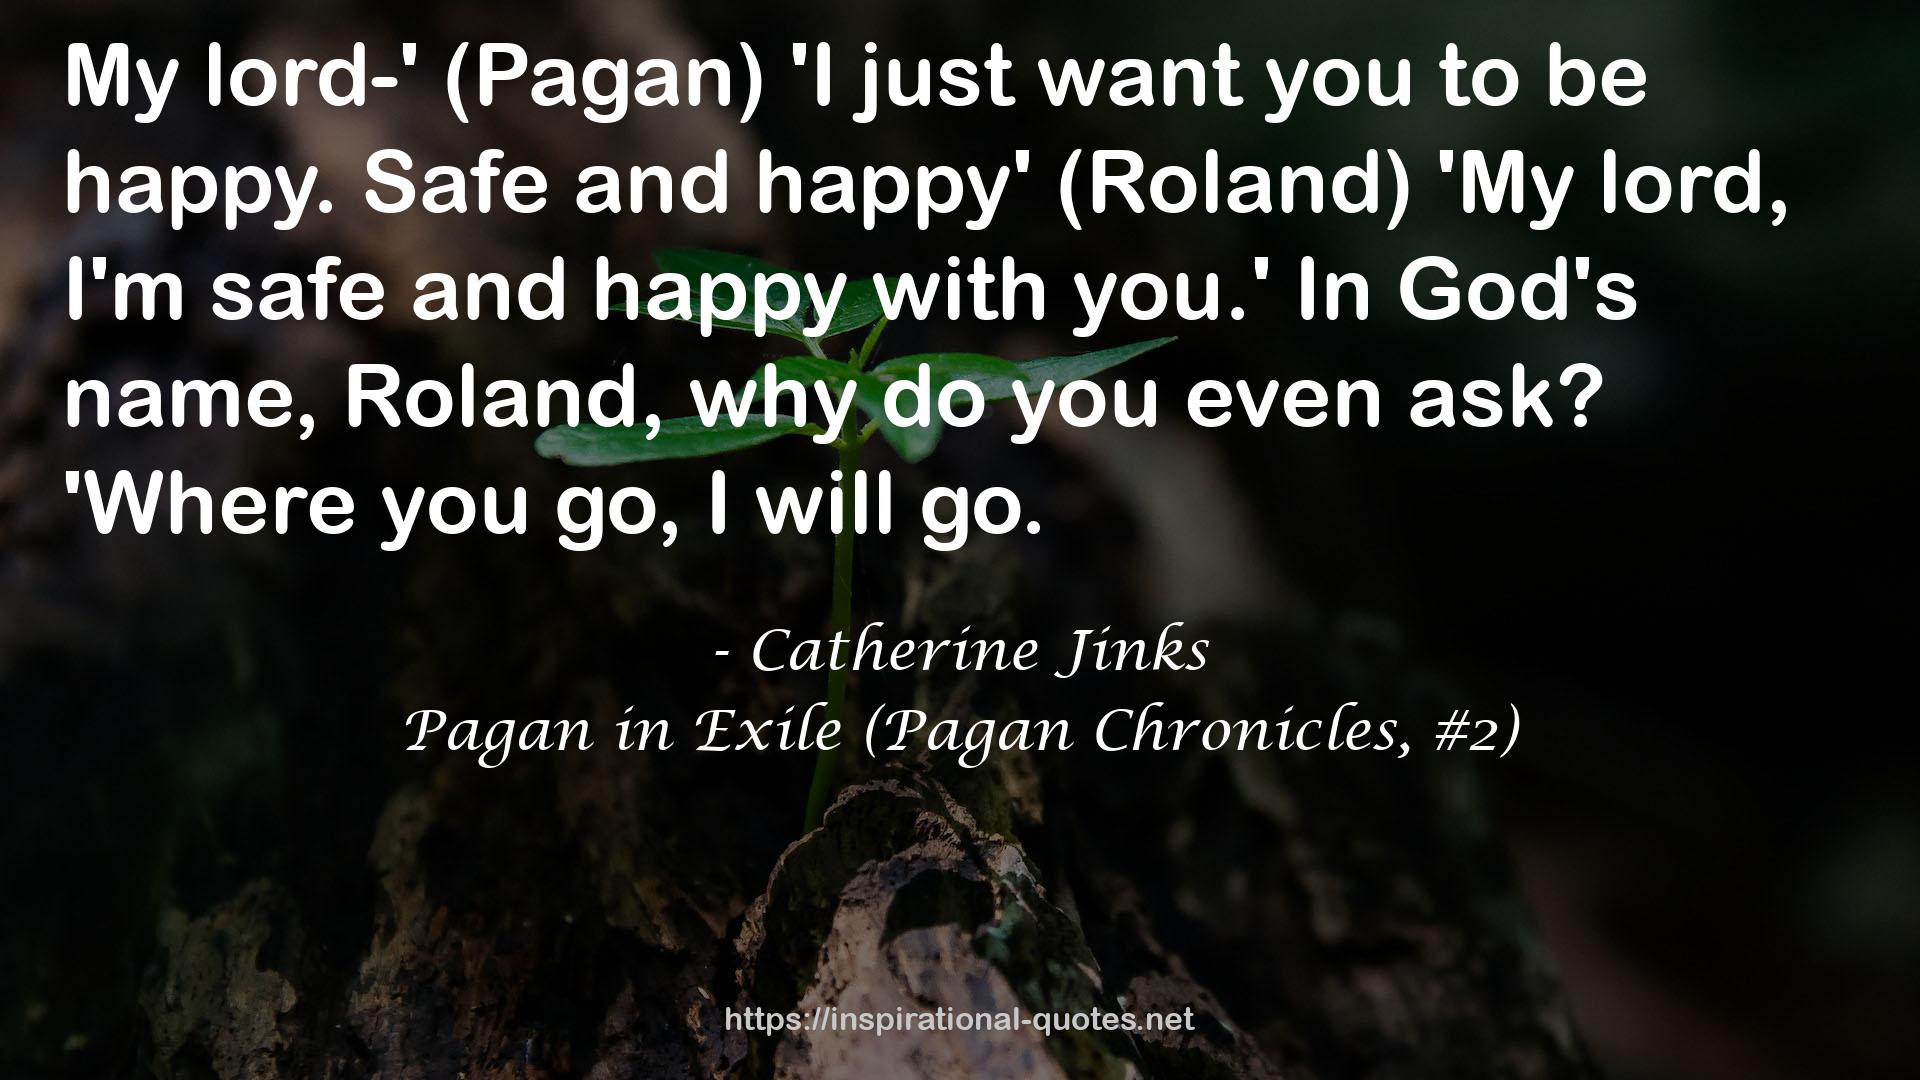 Pagan in Exile (Pagan Chronicles, #2) QUOTES